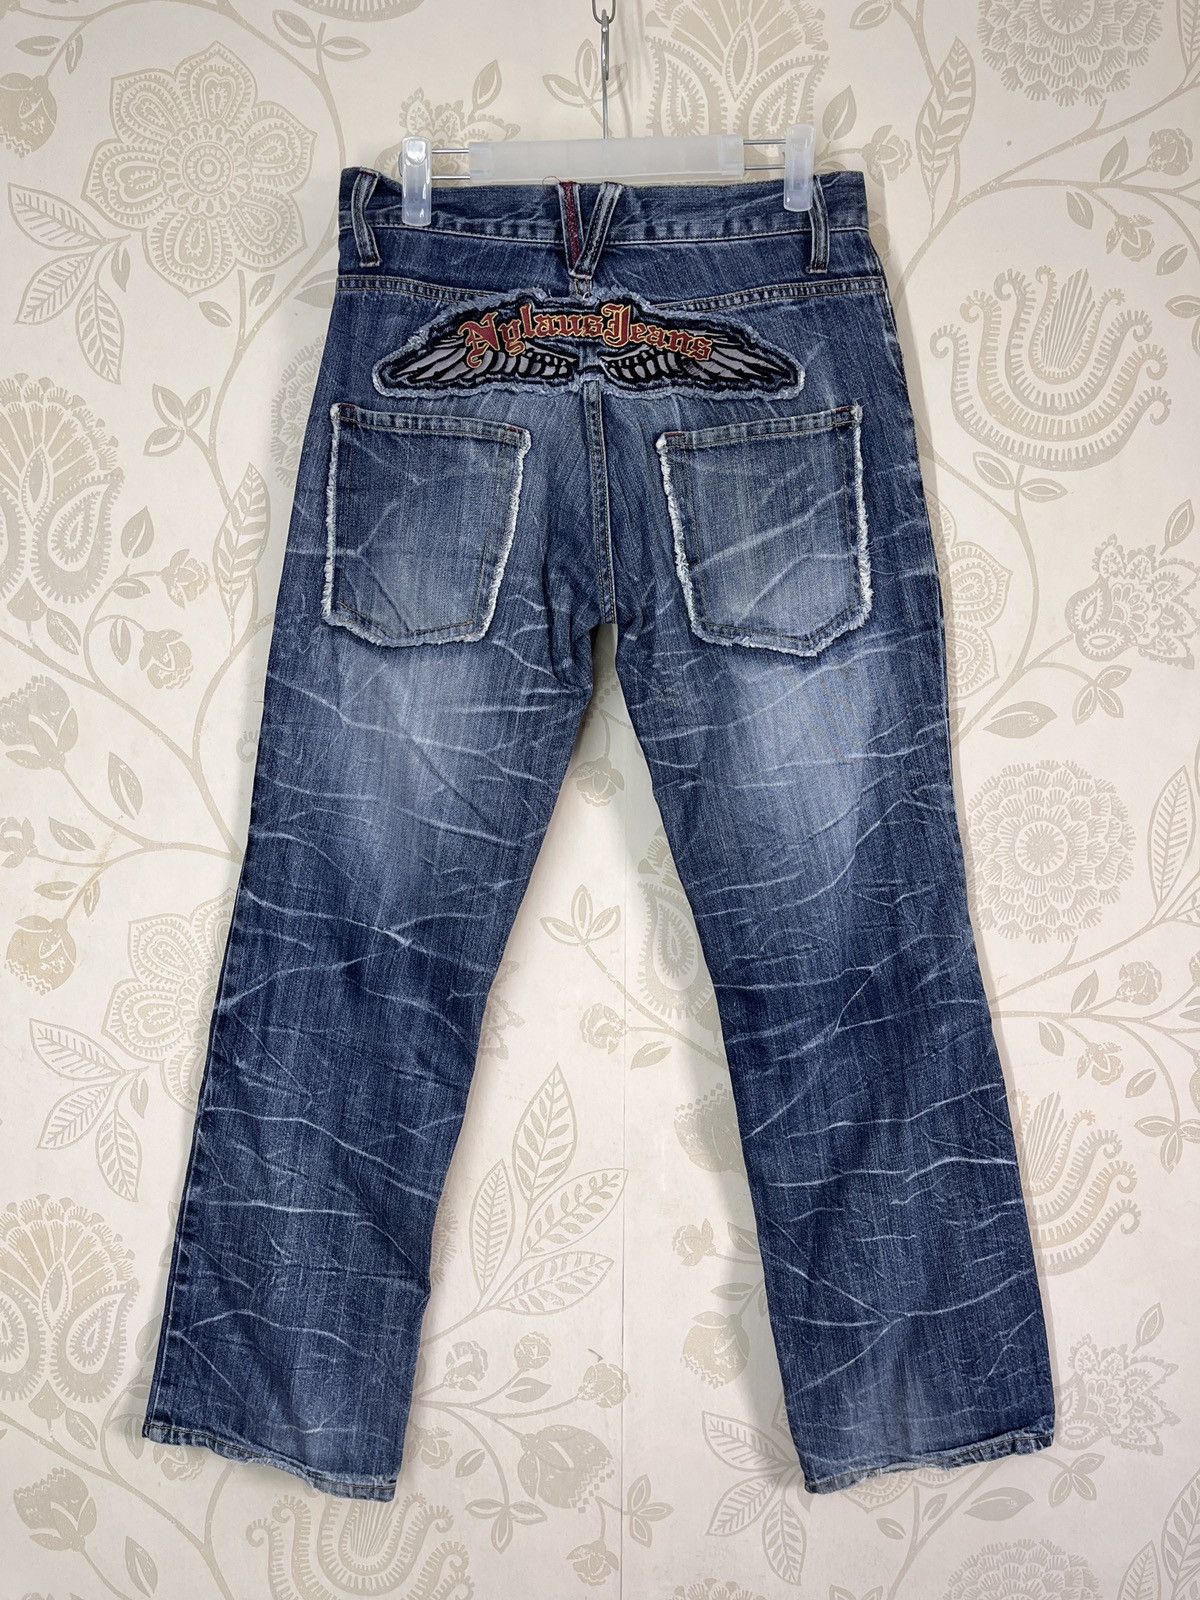 Japanese Brand - Nylaus Clothing Hysteric Style Denim Jeans Seditionaries - 1